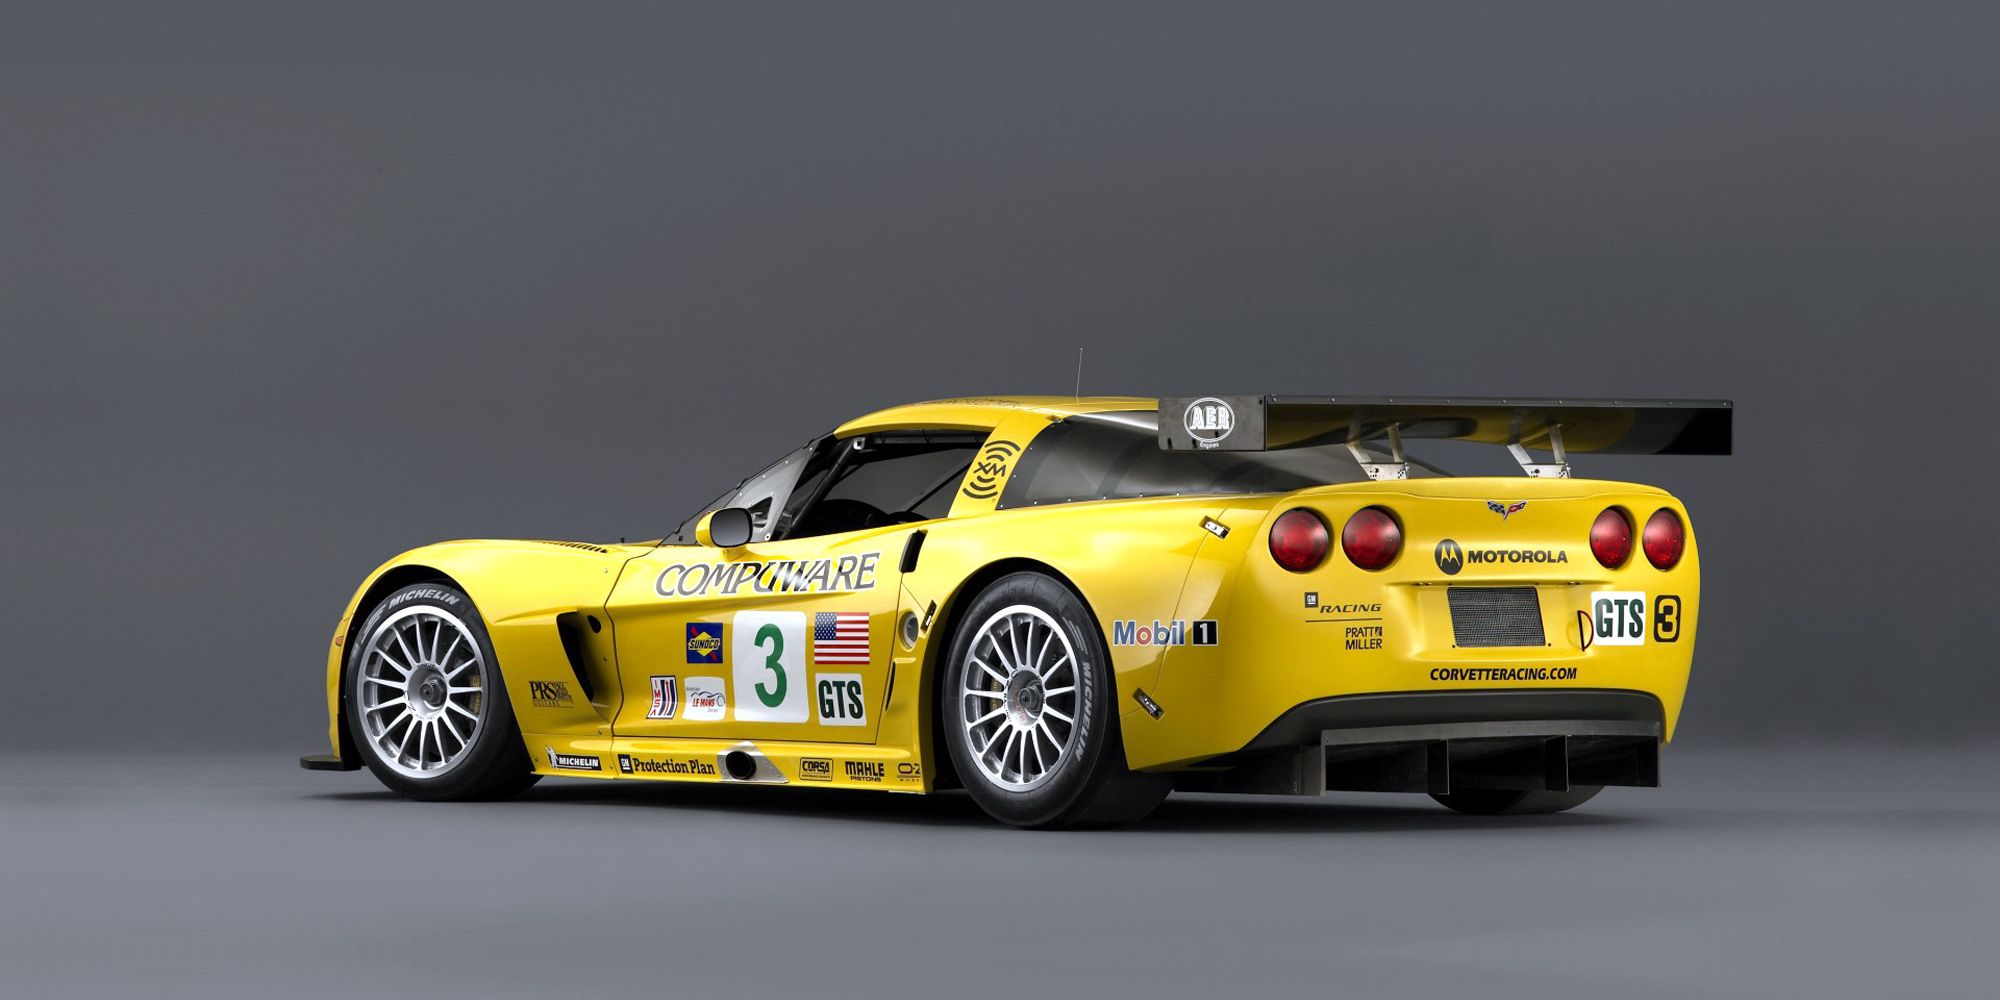 The rear of the C6.R